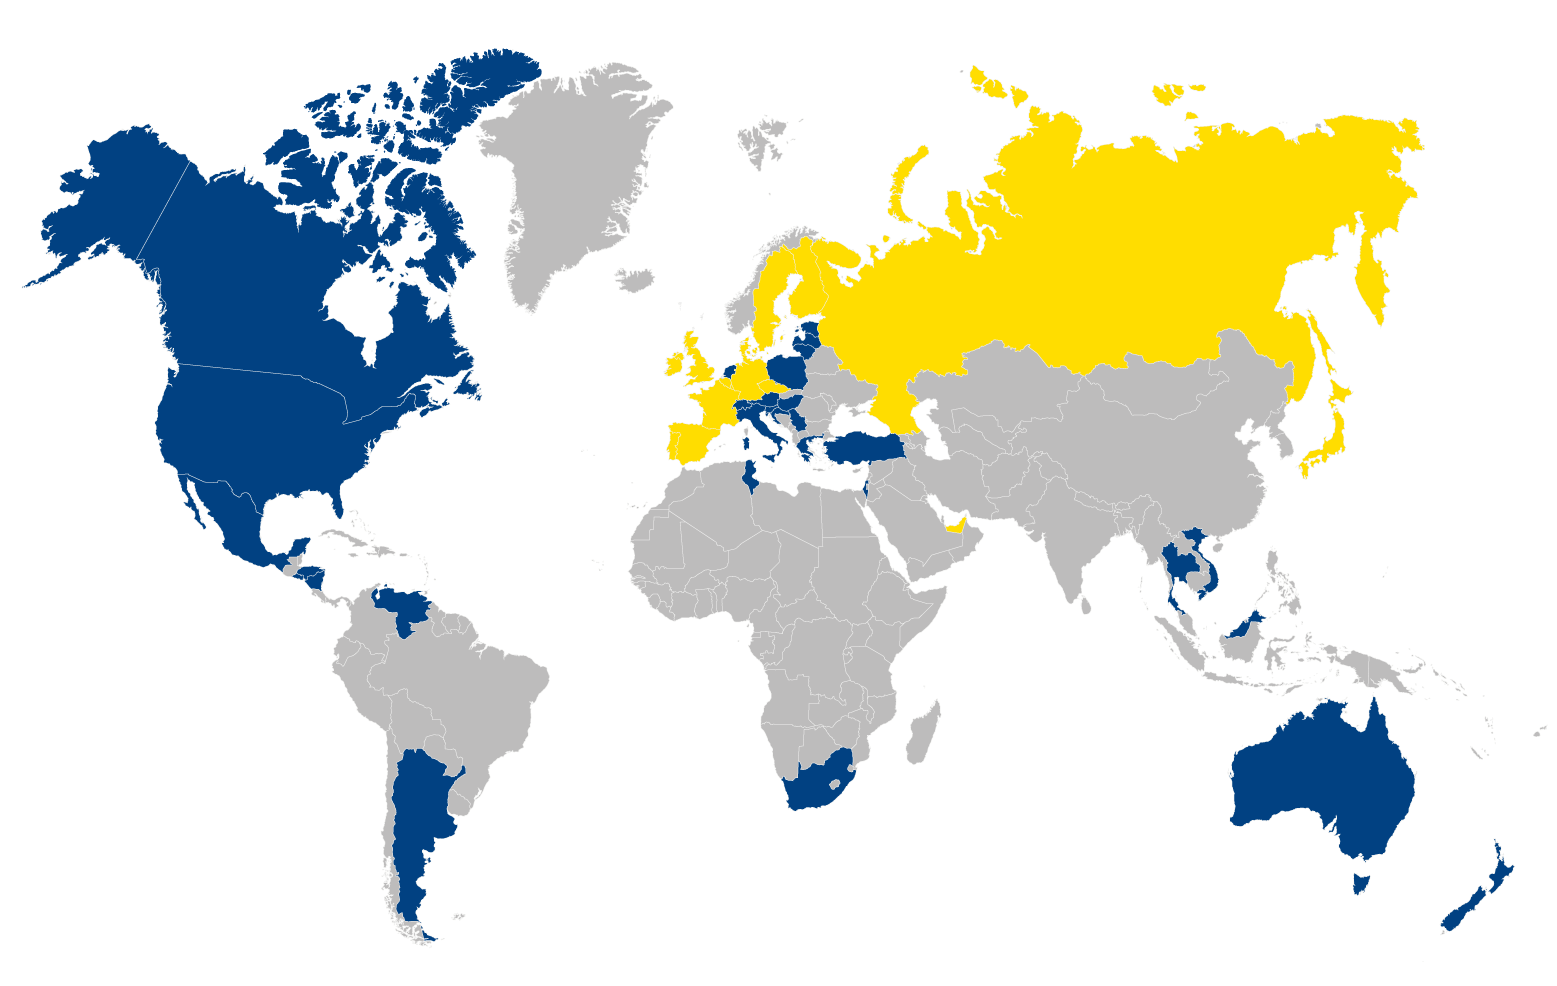 the map shows the countries where atem successfully sells air shafts